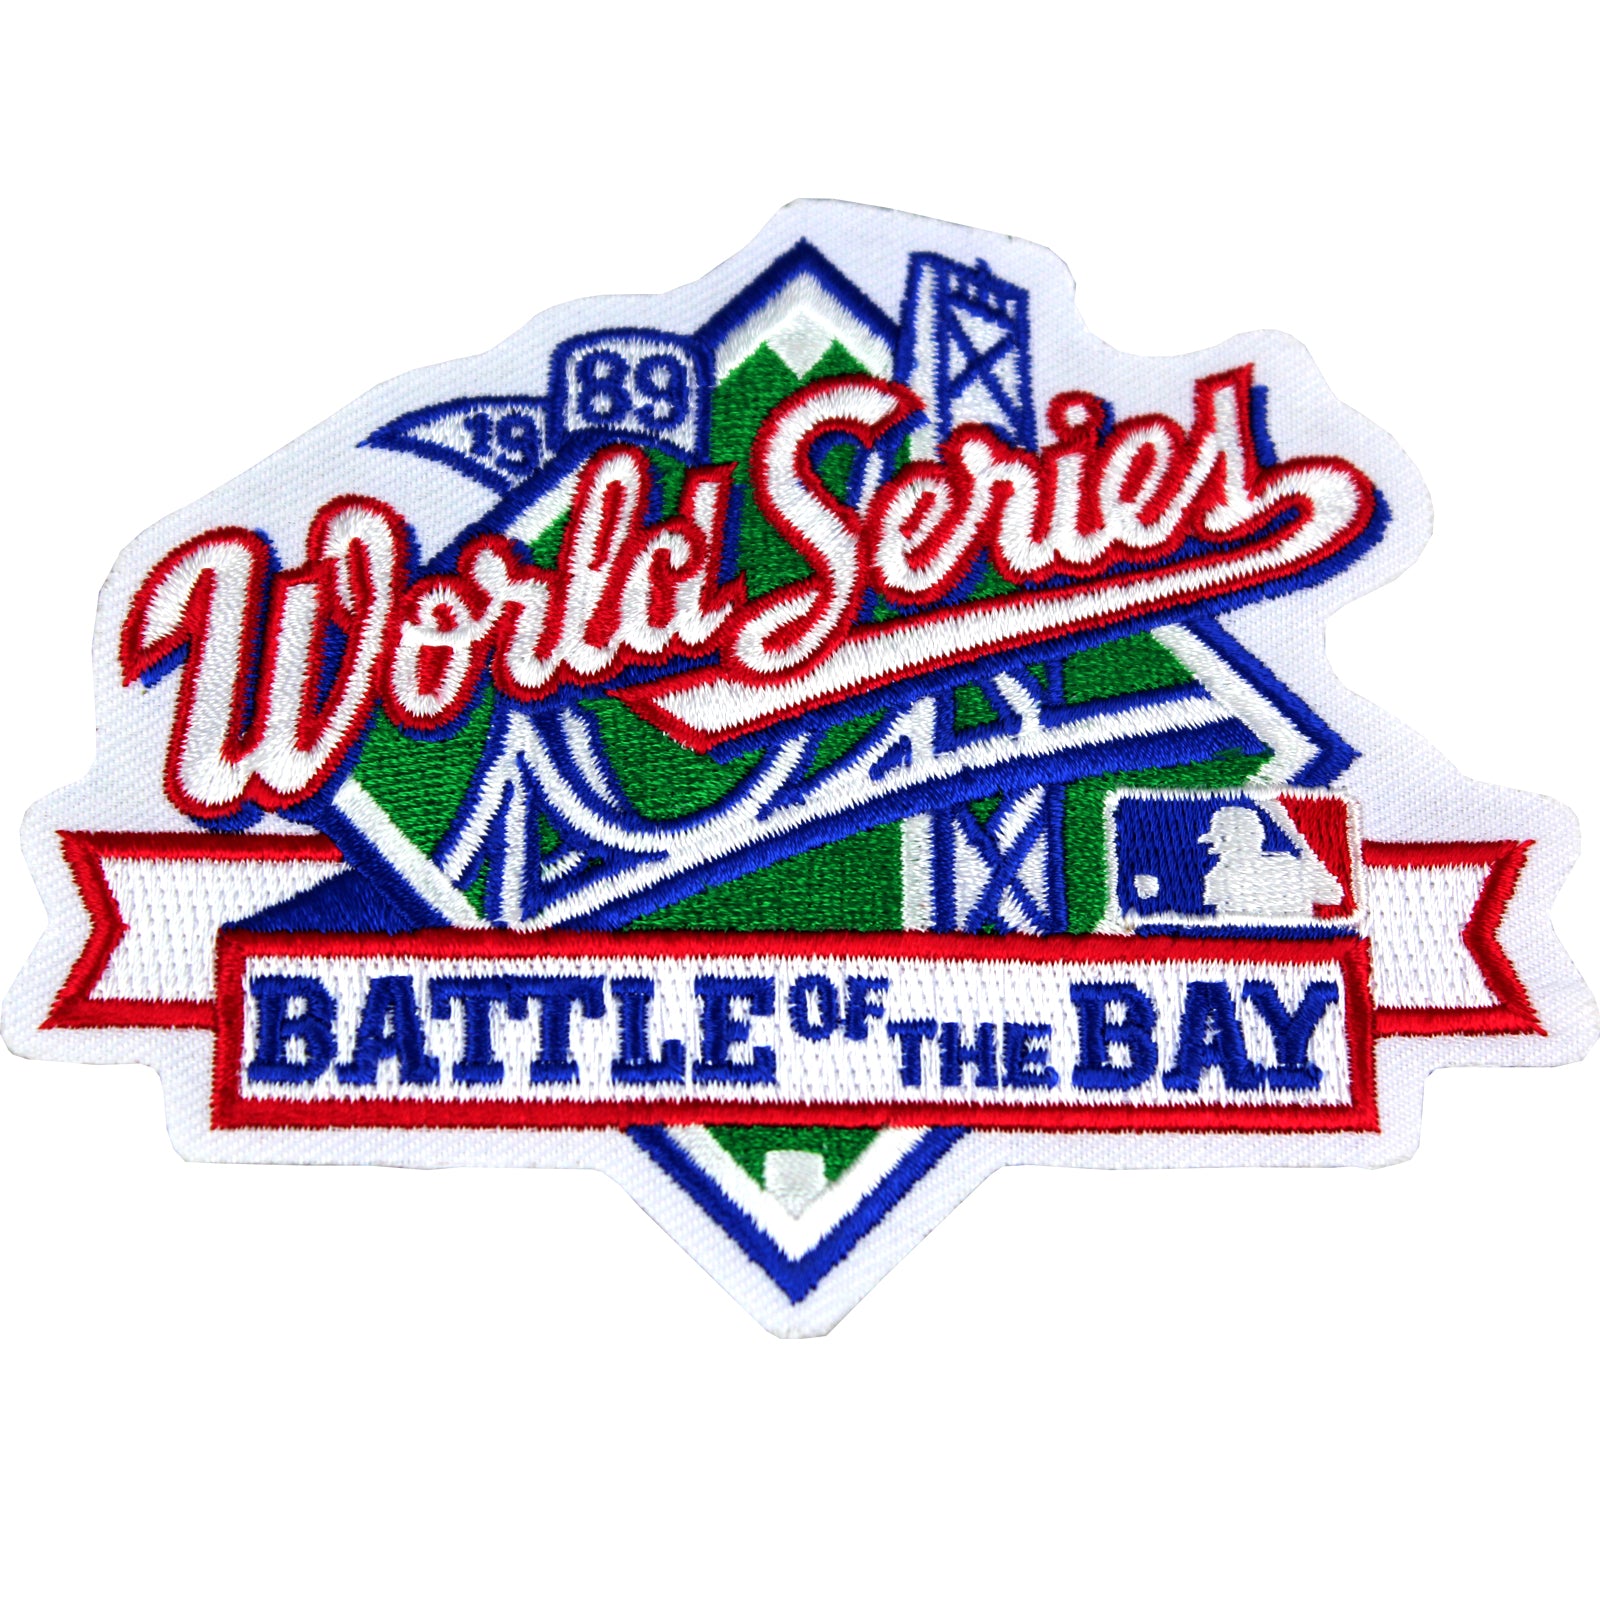 Oakland Athletics 4.5 x 3.5 Battle of The Bay 1989 World Series Patch